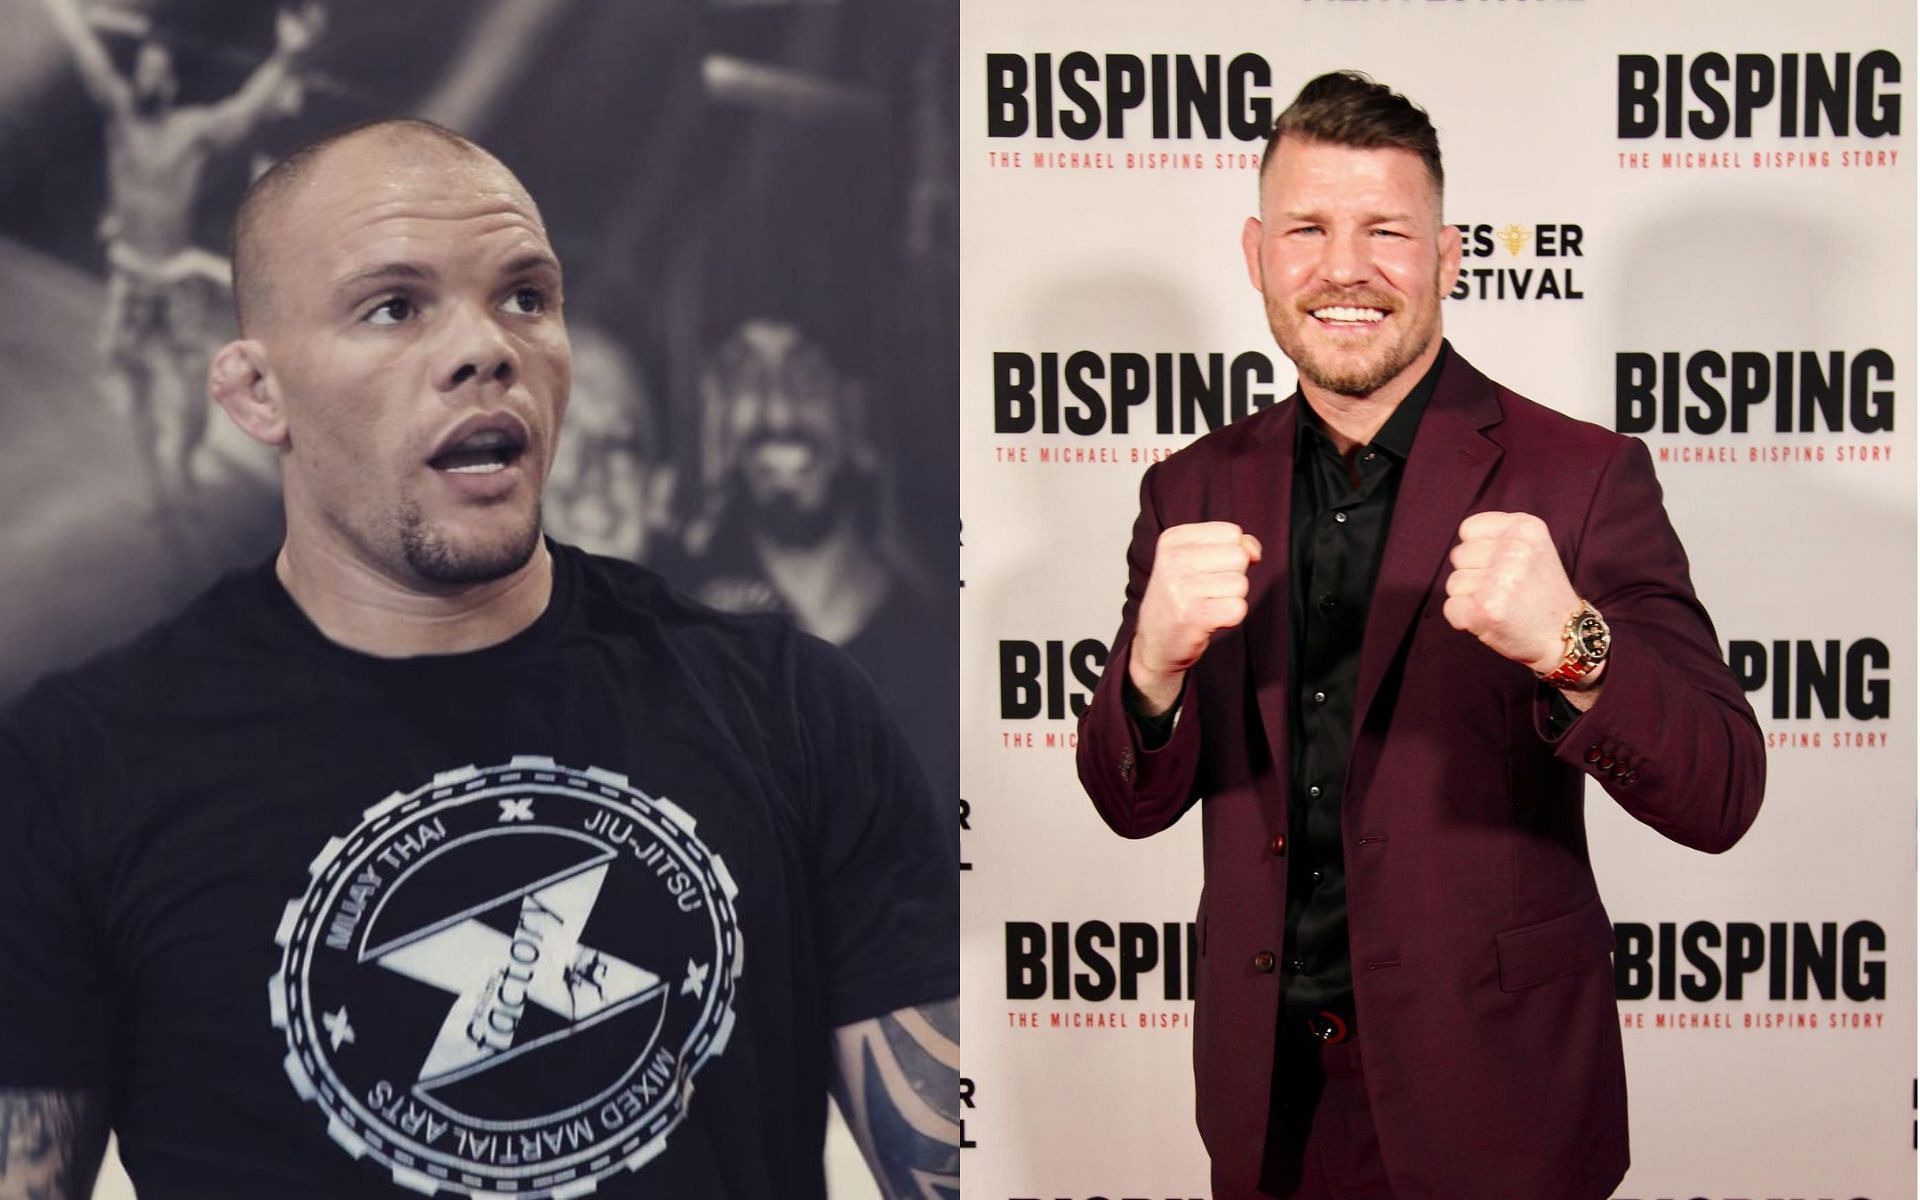 Anthony Smith (Left) and Michael Bisping (Right) (Images courtesy f @lionheartsmith Instagram and @mikebisping Instagram)